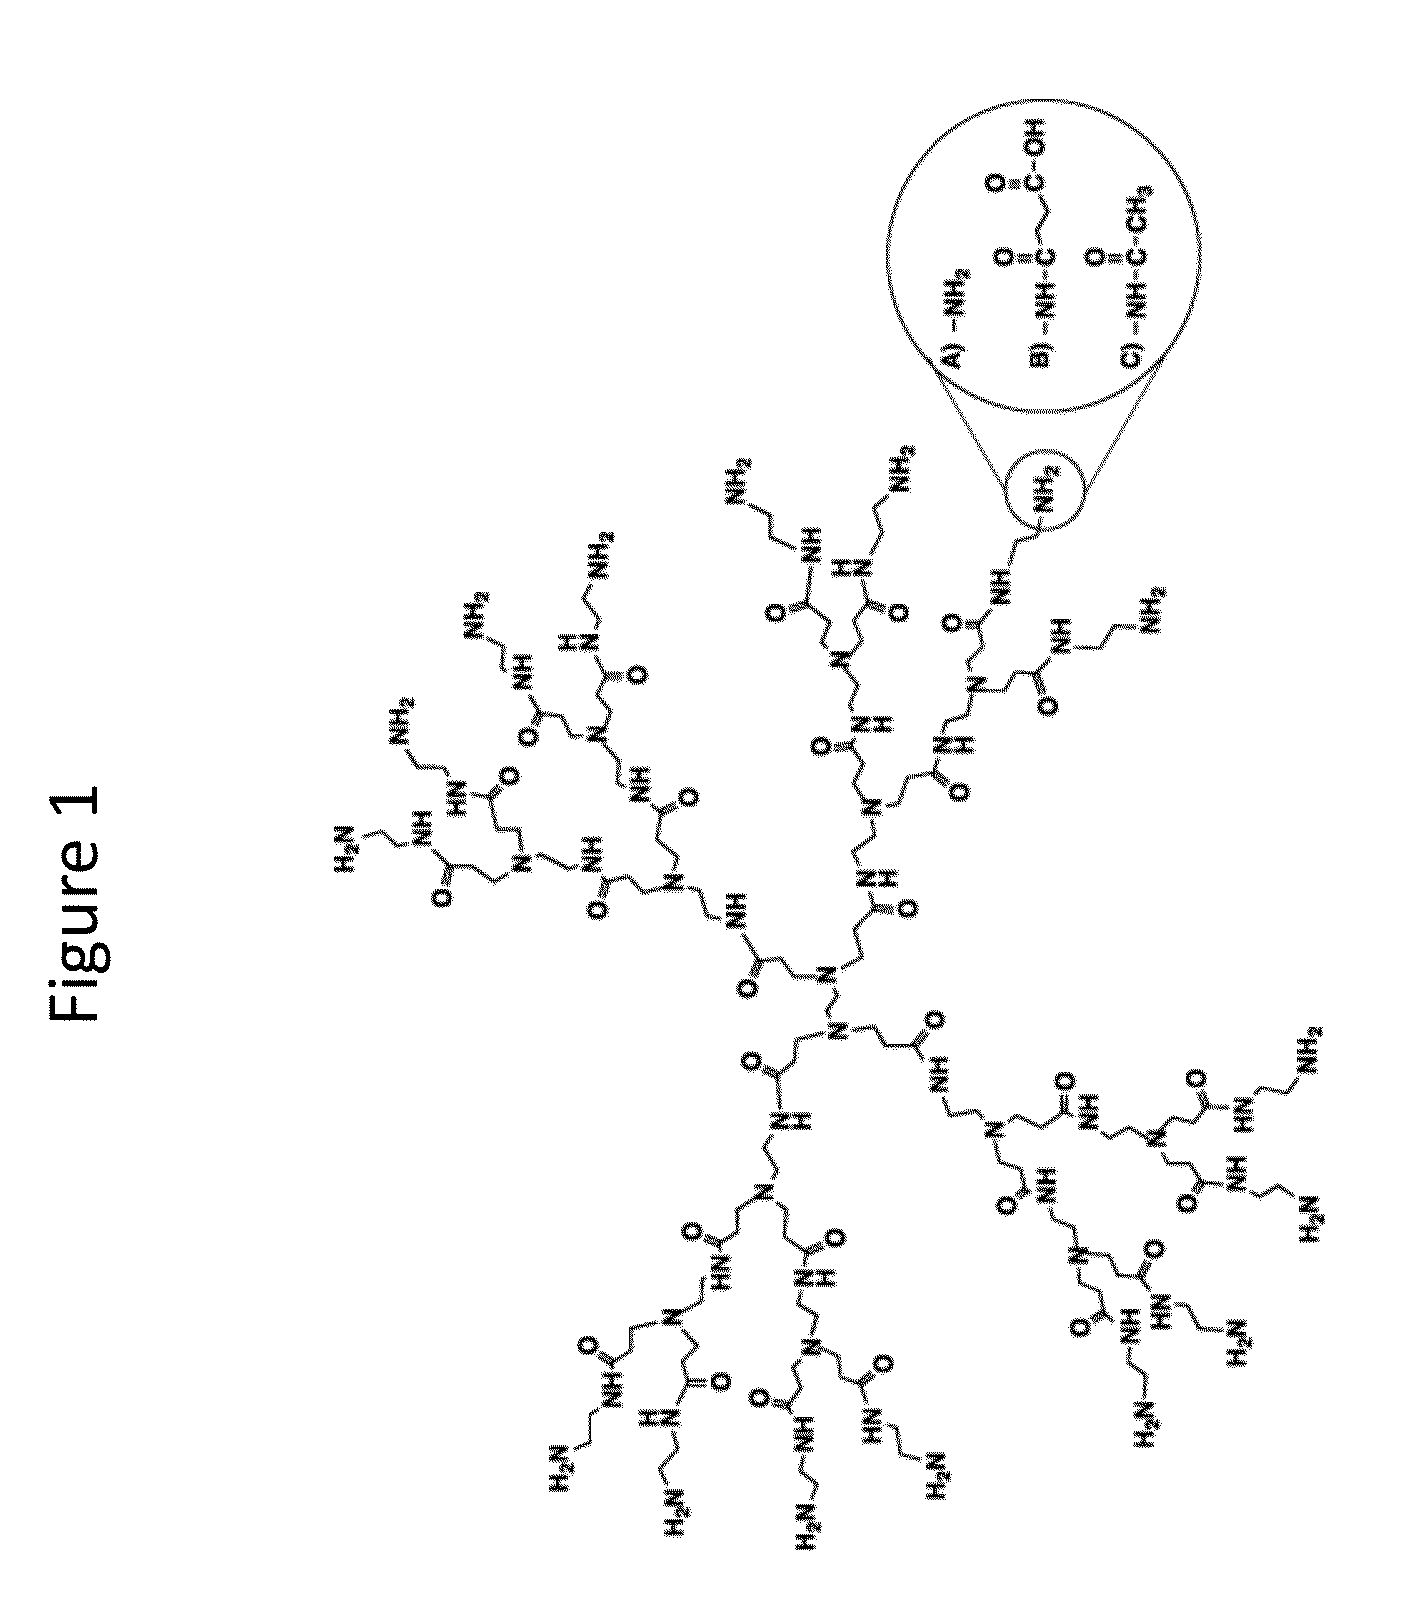 Transdermal Delivery of Therapeutic Agents Using Poly (Amidoamine) Dendrimers